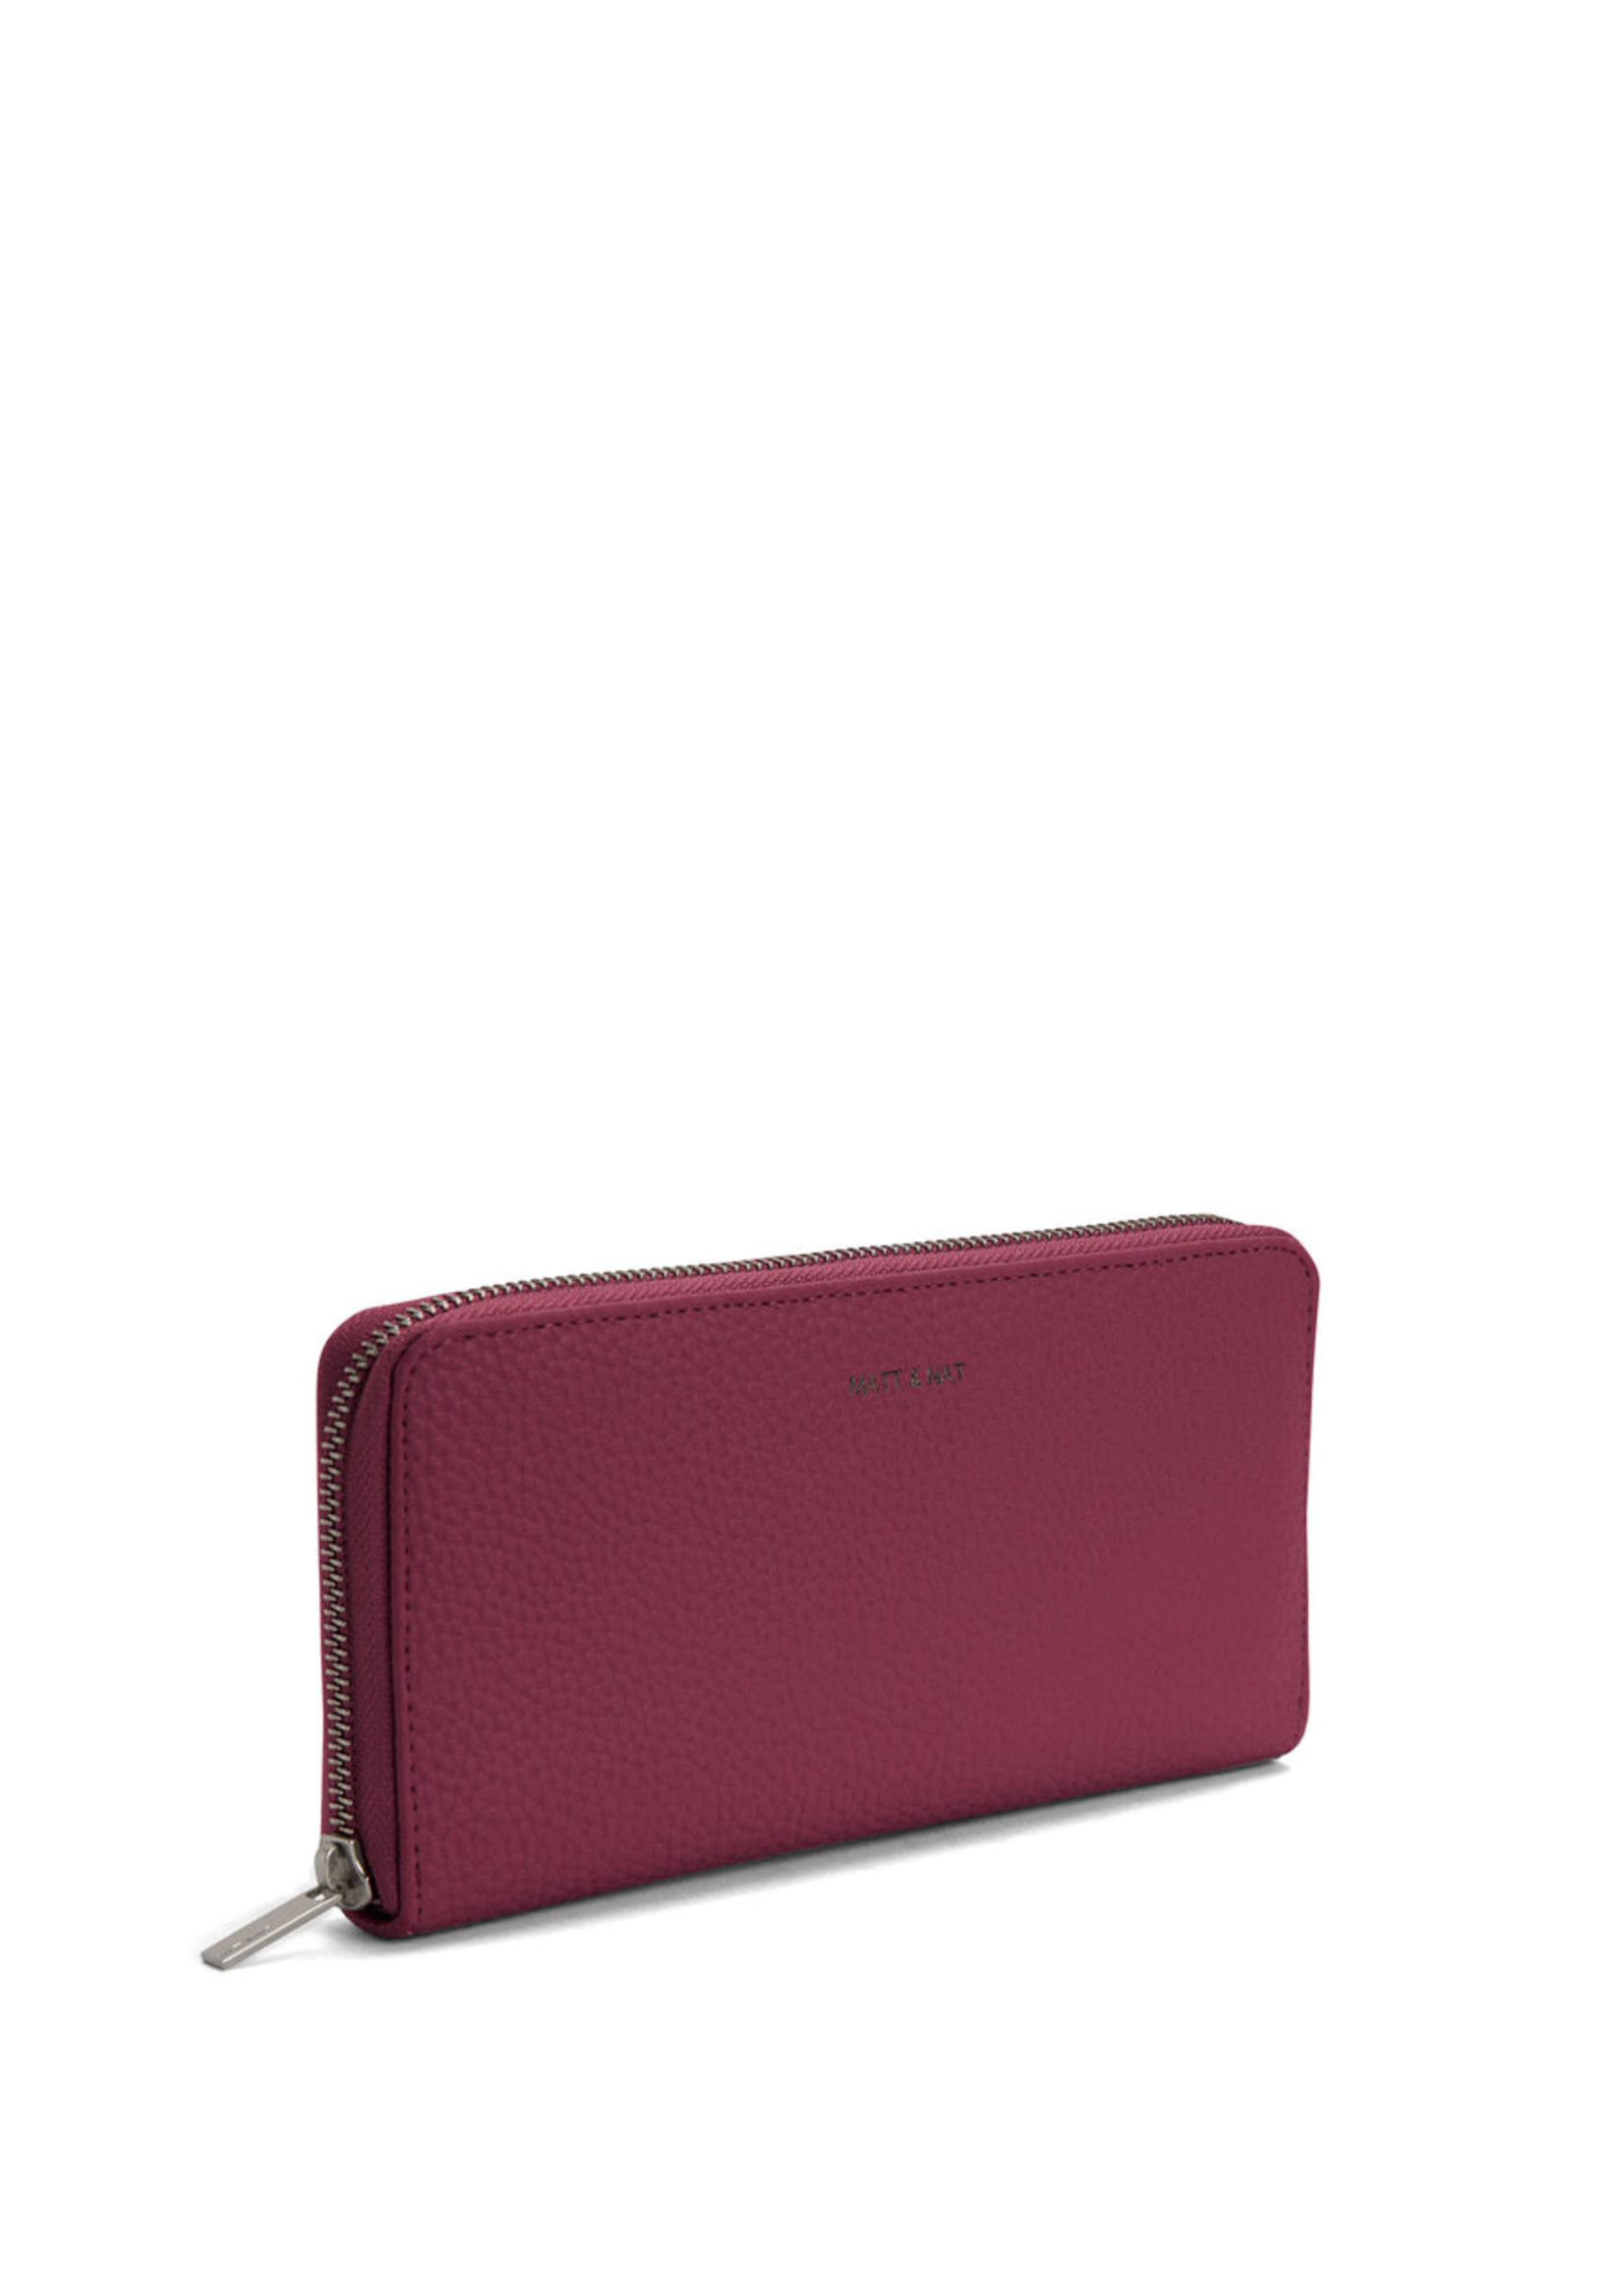 Matt & Nat CENTRAL WALLET-PURITY COLLECTION